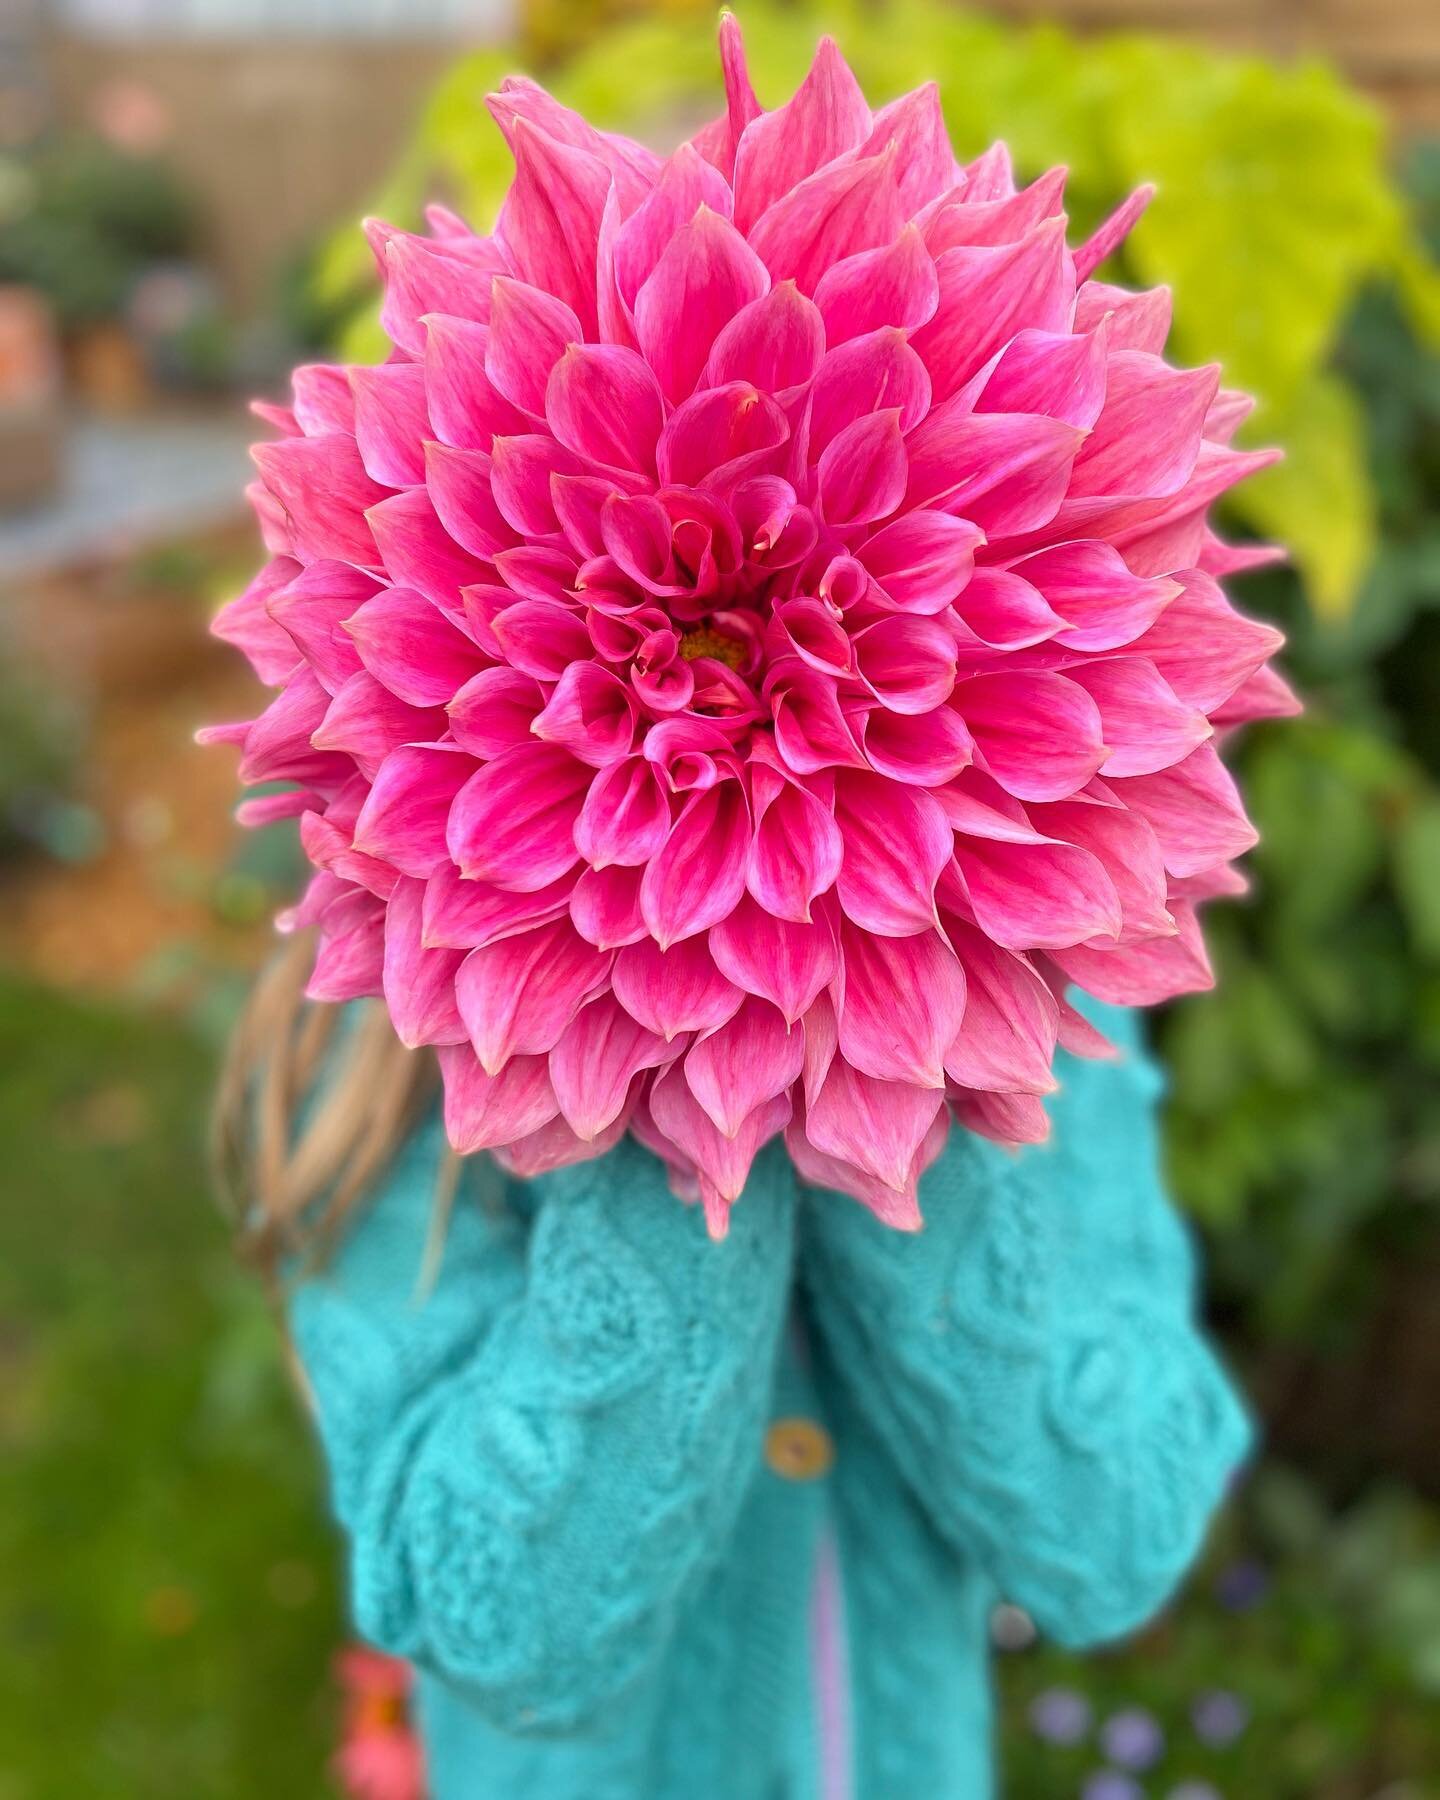 We go away for a week and come home to a plot full of giants&hellip; 🌸

Everything has gone completely wild in our absence and the house is full of dahlias. I remember having dahlias at Halloween last year but not in these numbers! Are your dahlias 